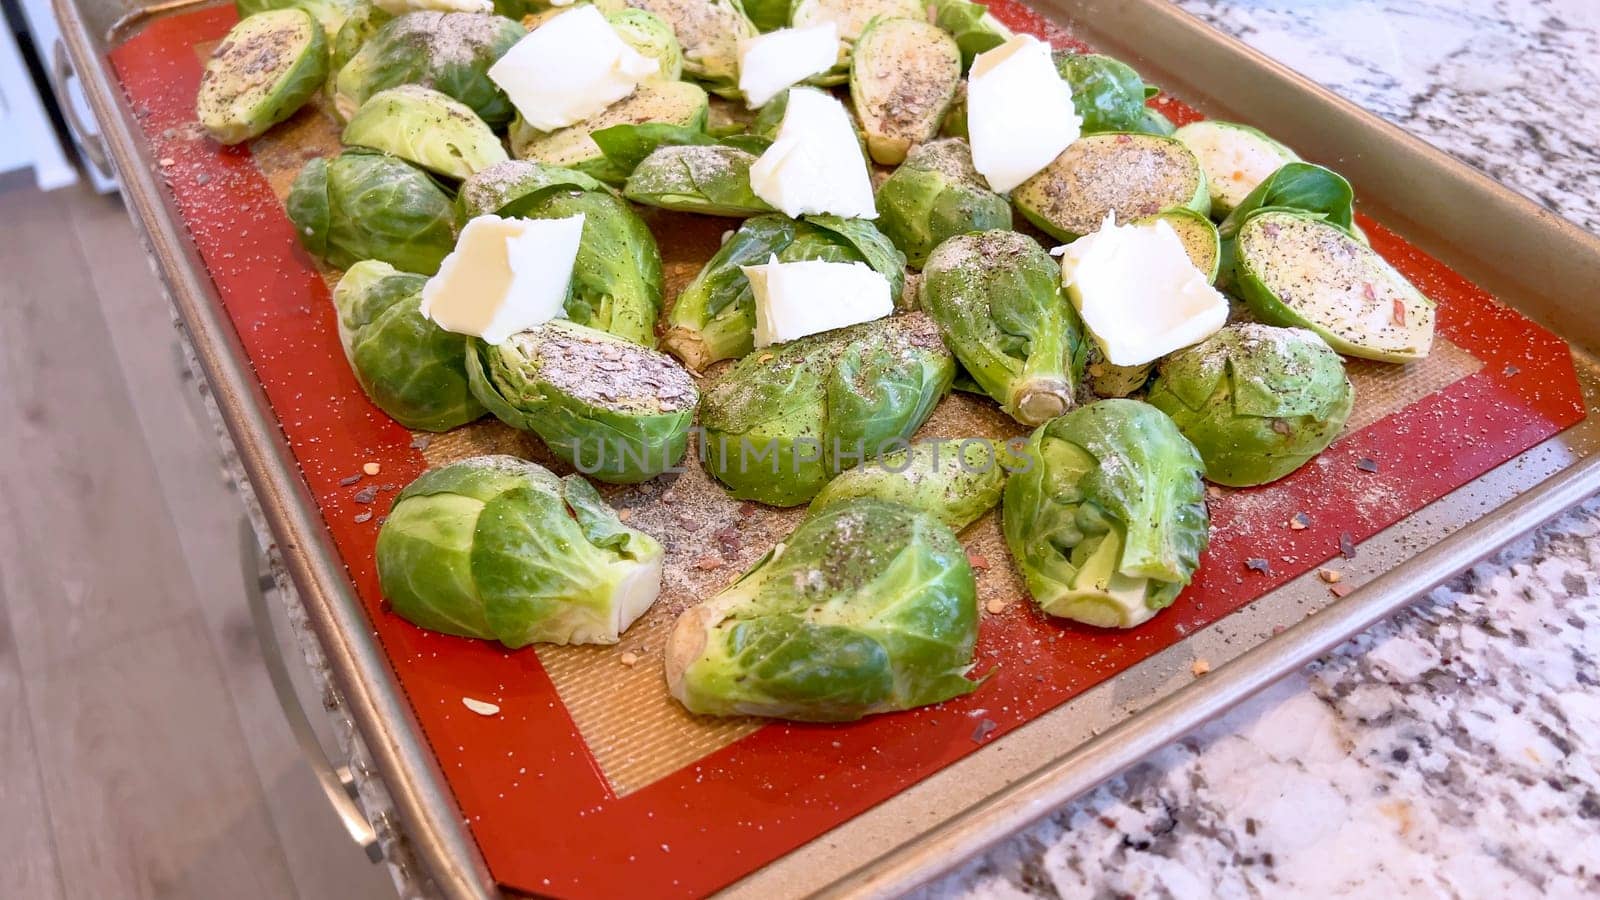 Fresh Brussels sprouts seasoned with spices and topped with slices of butter, arranged on a baking sheet, ready to be roasted to perfection.